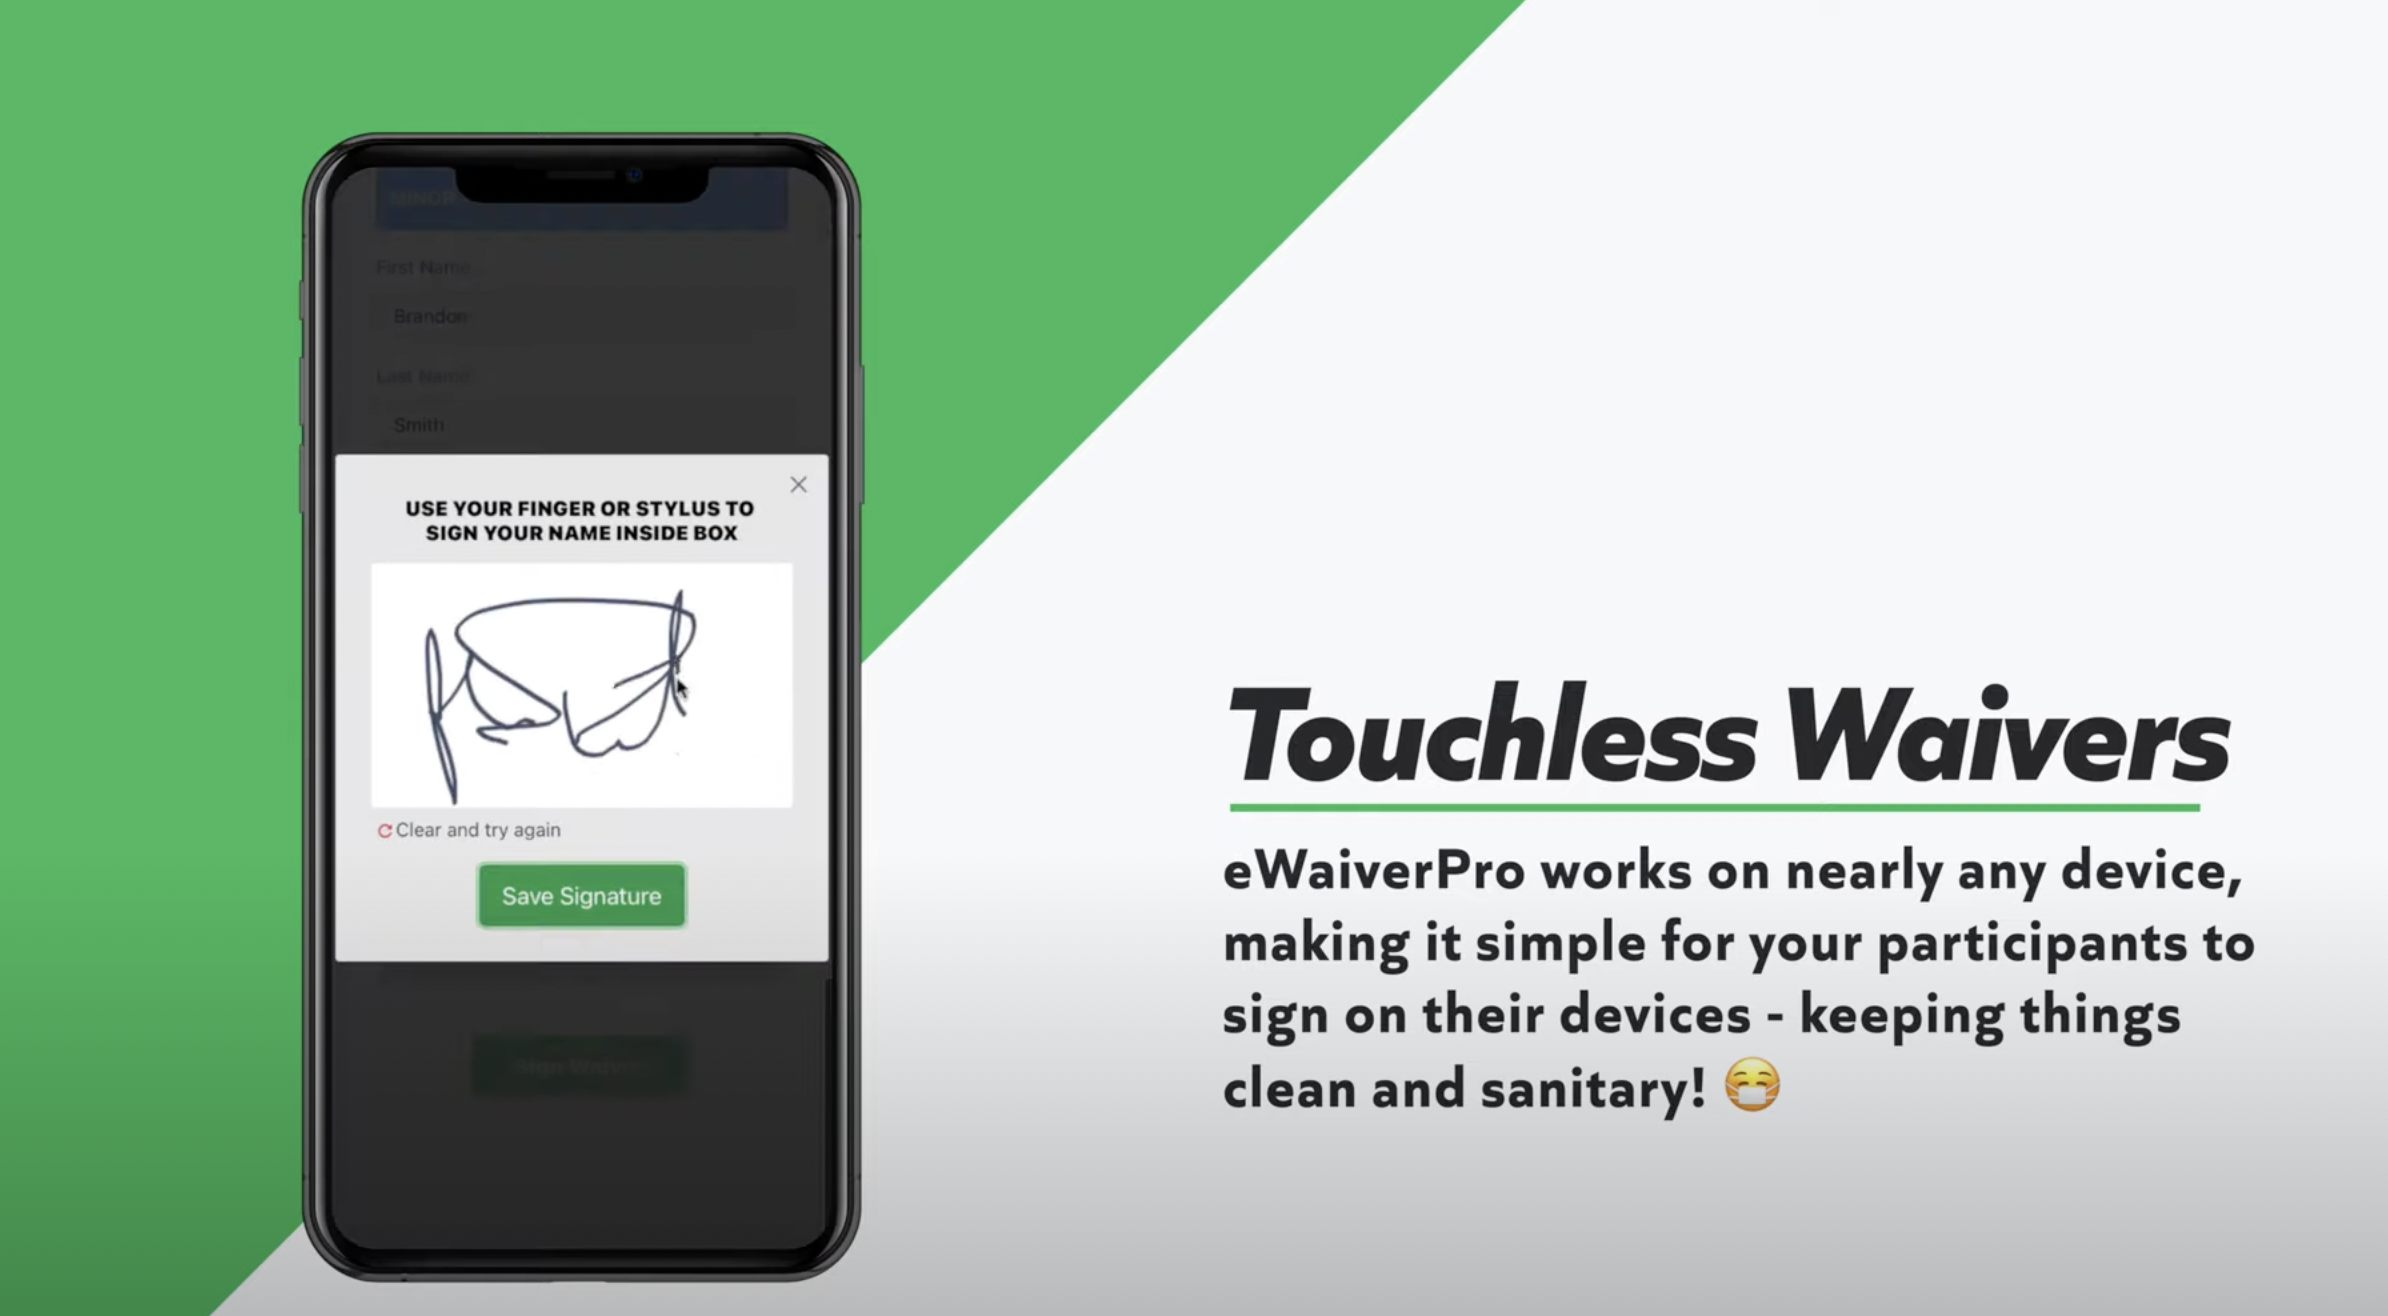 eWaiverPro touchless waivers